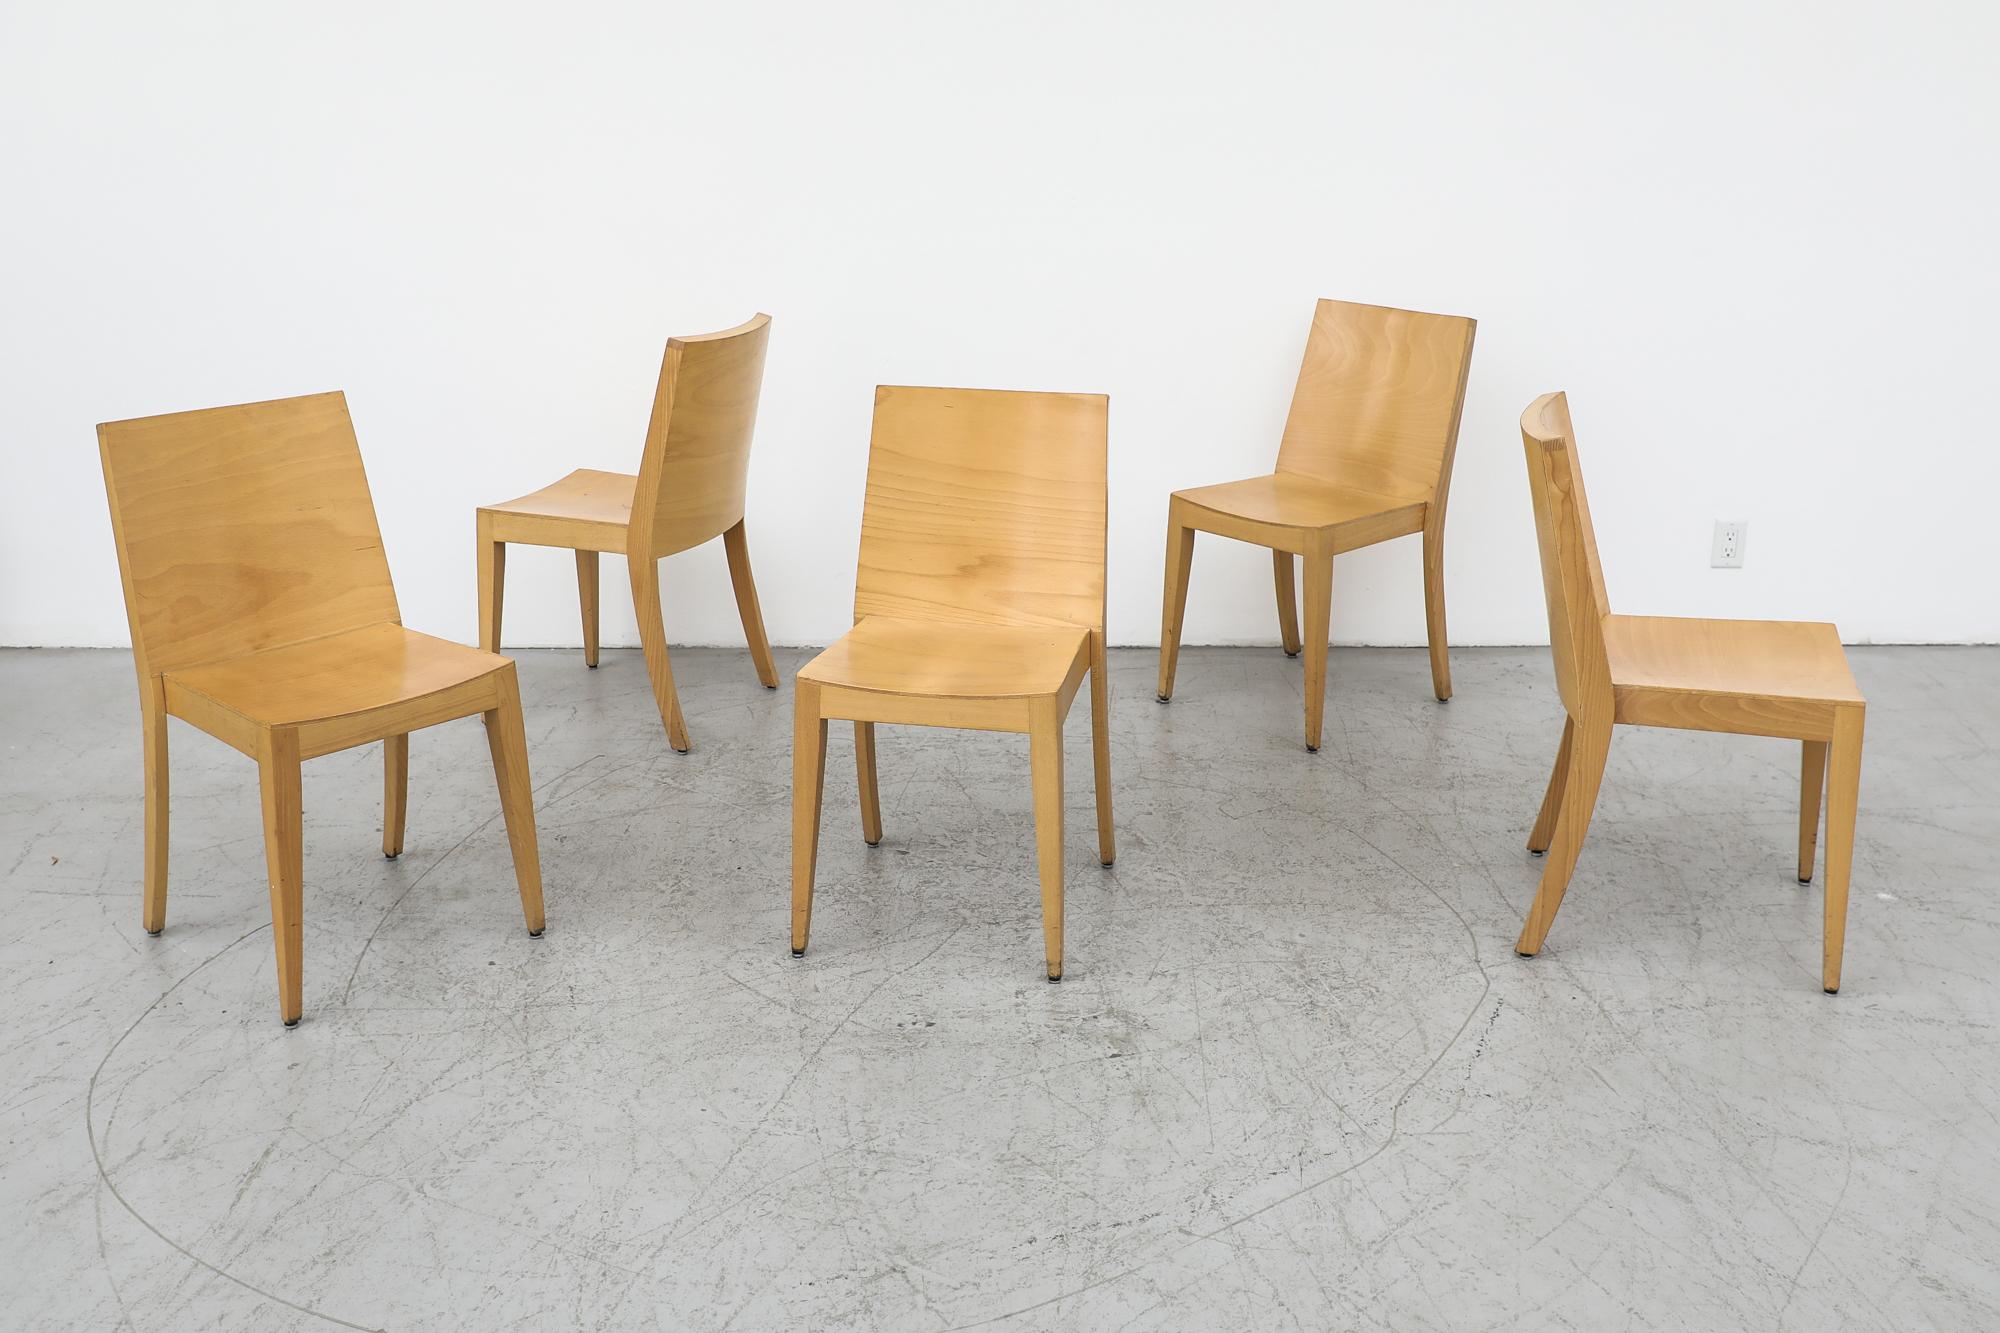 Philippe Starck style blonde wood stacking chairs. Great architectural lines. In original condition with visible wear, consistent with age and use. Also available in a dark brown version (LU922427276402), listed separately.